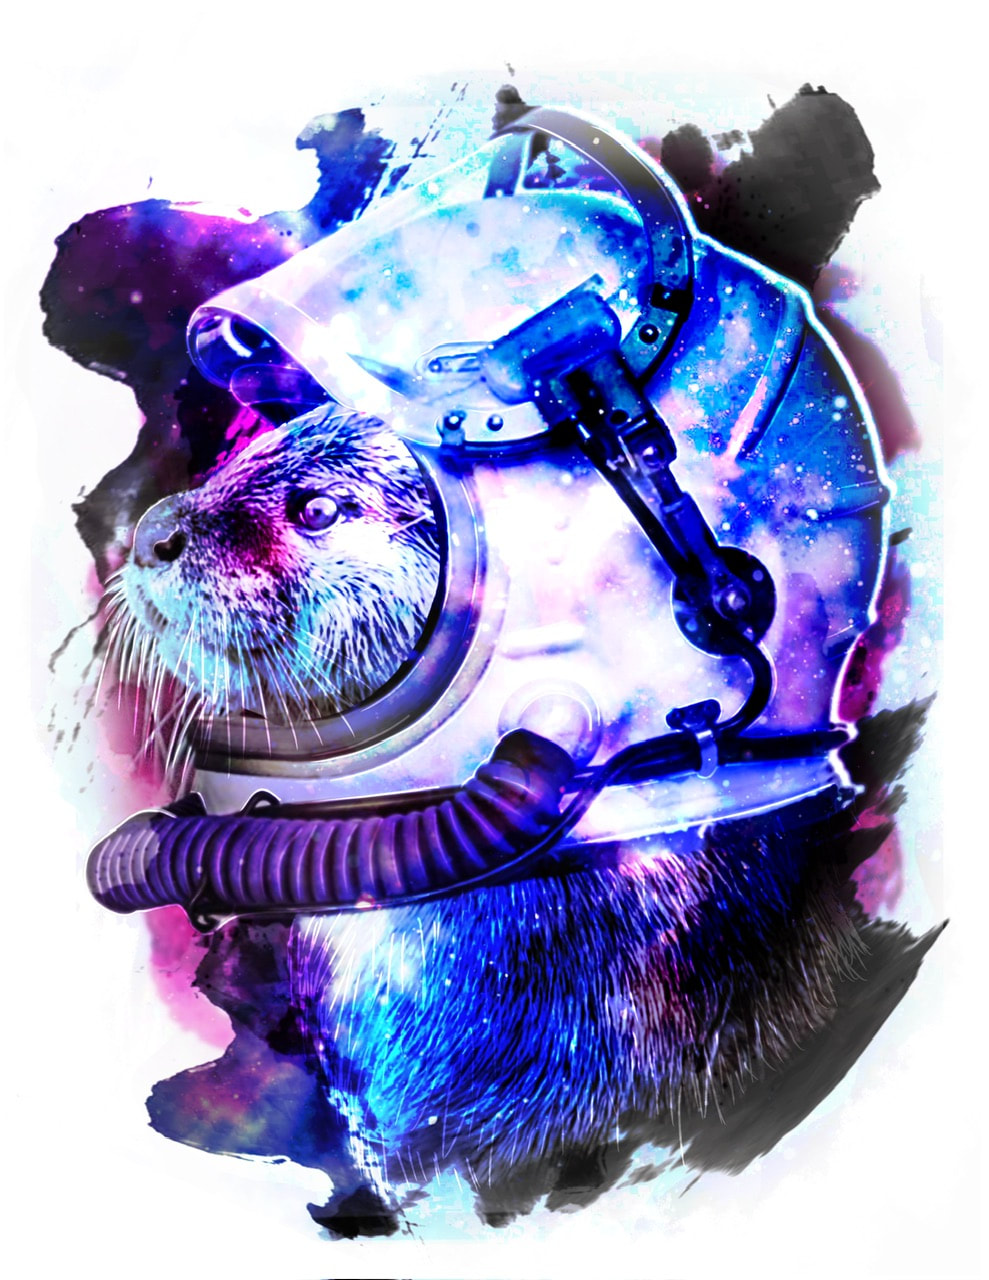 Otter wearing an astronaut helmet in purple, blue, and black space. Galaxy tattoo design for sale.